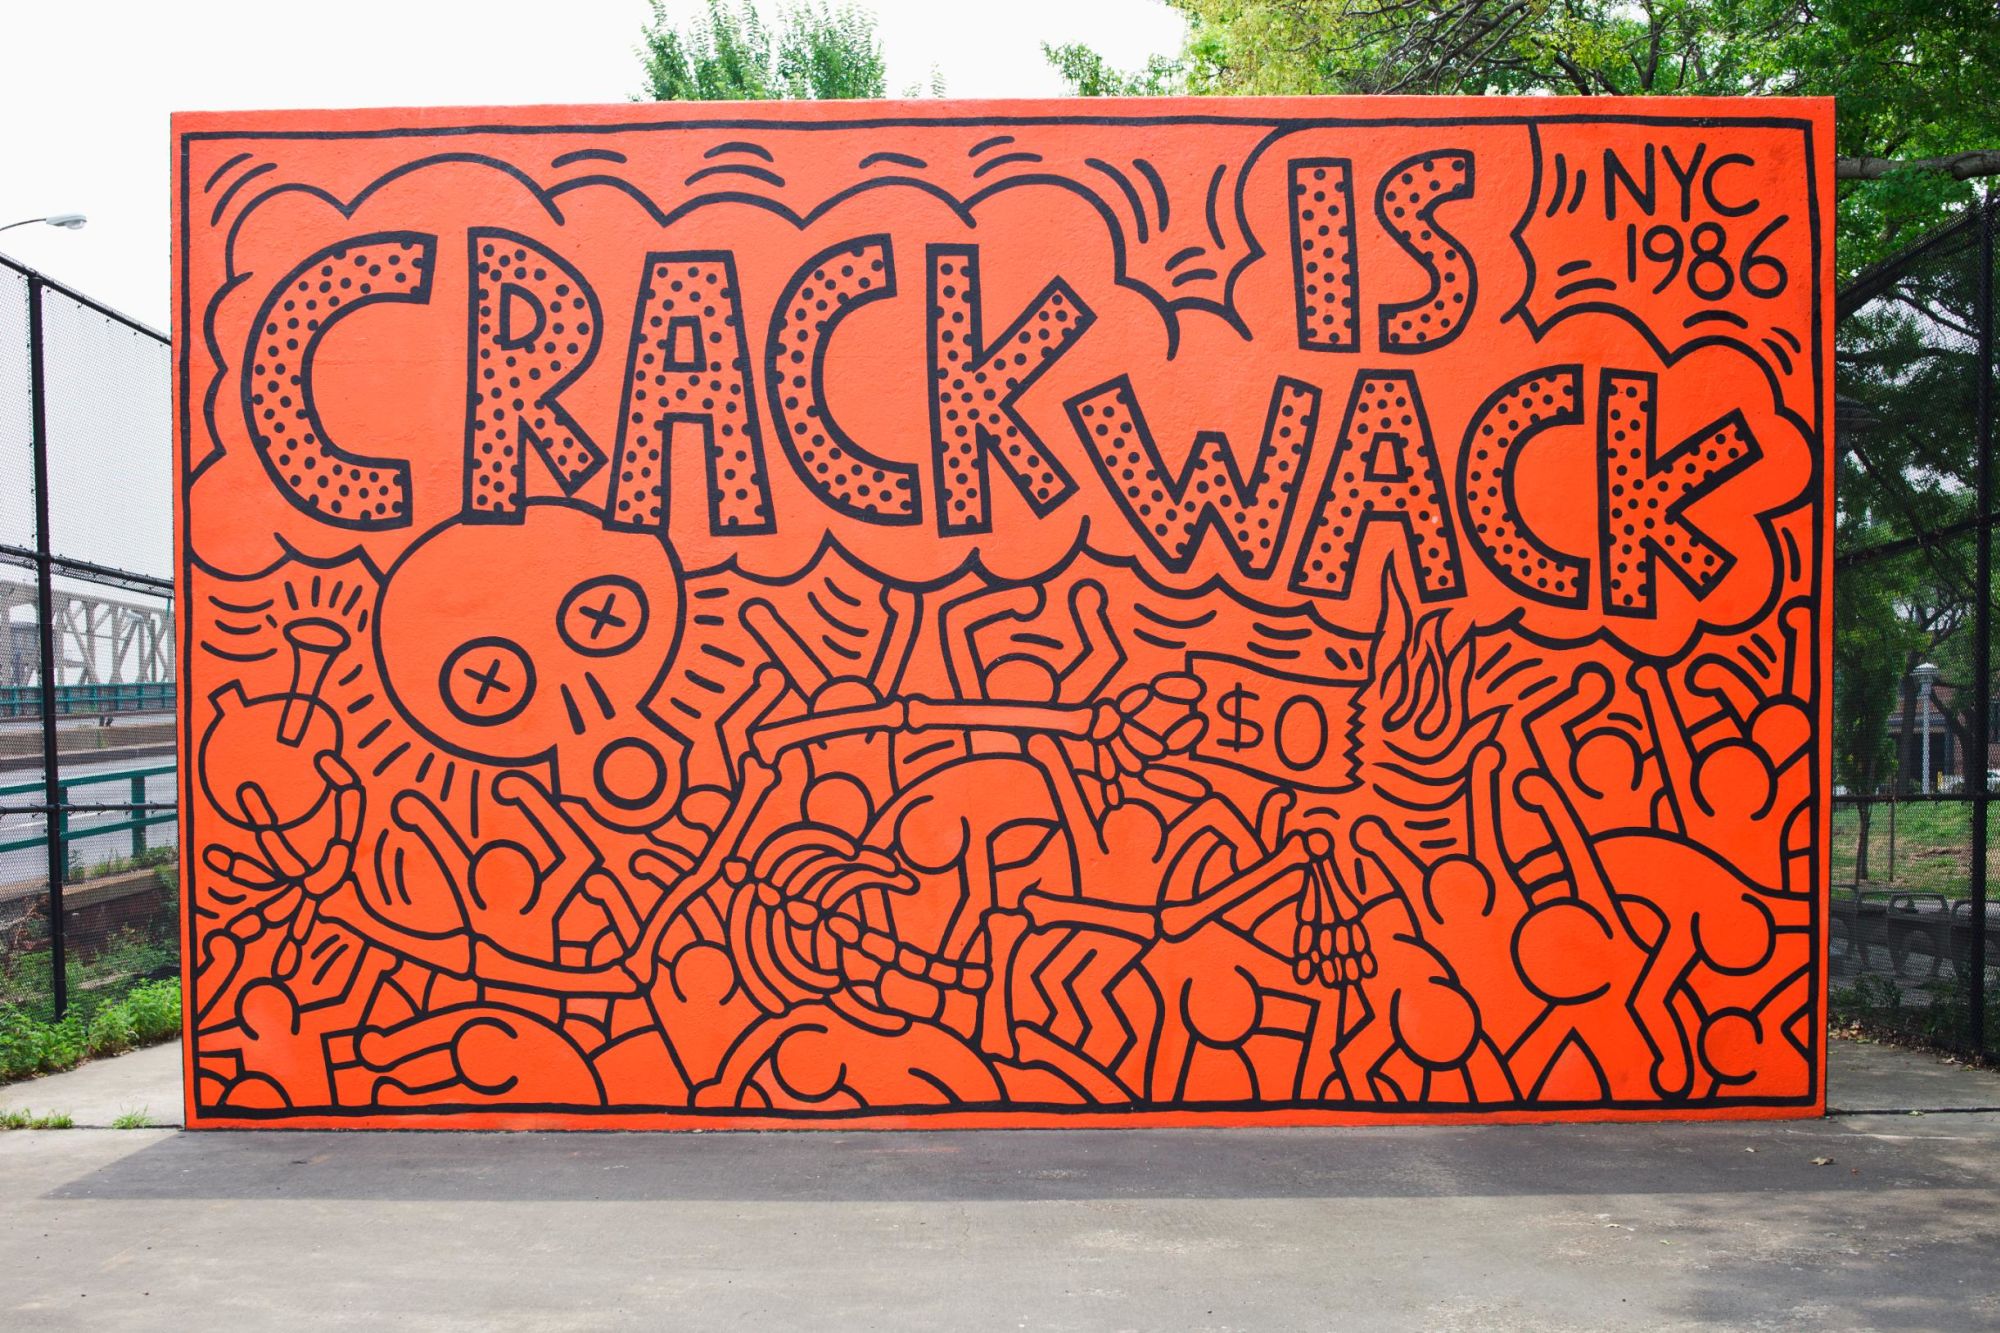 01 new york murals_crack is wack Keith Haring RESTRICTED